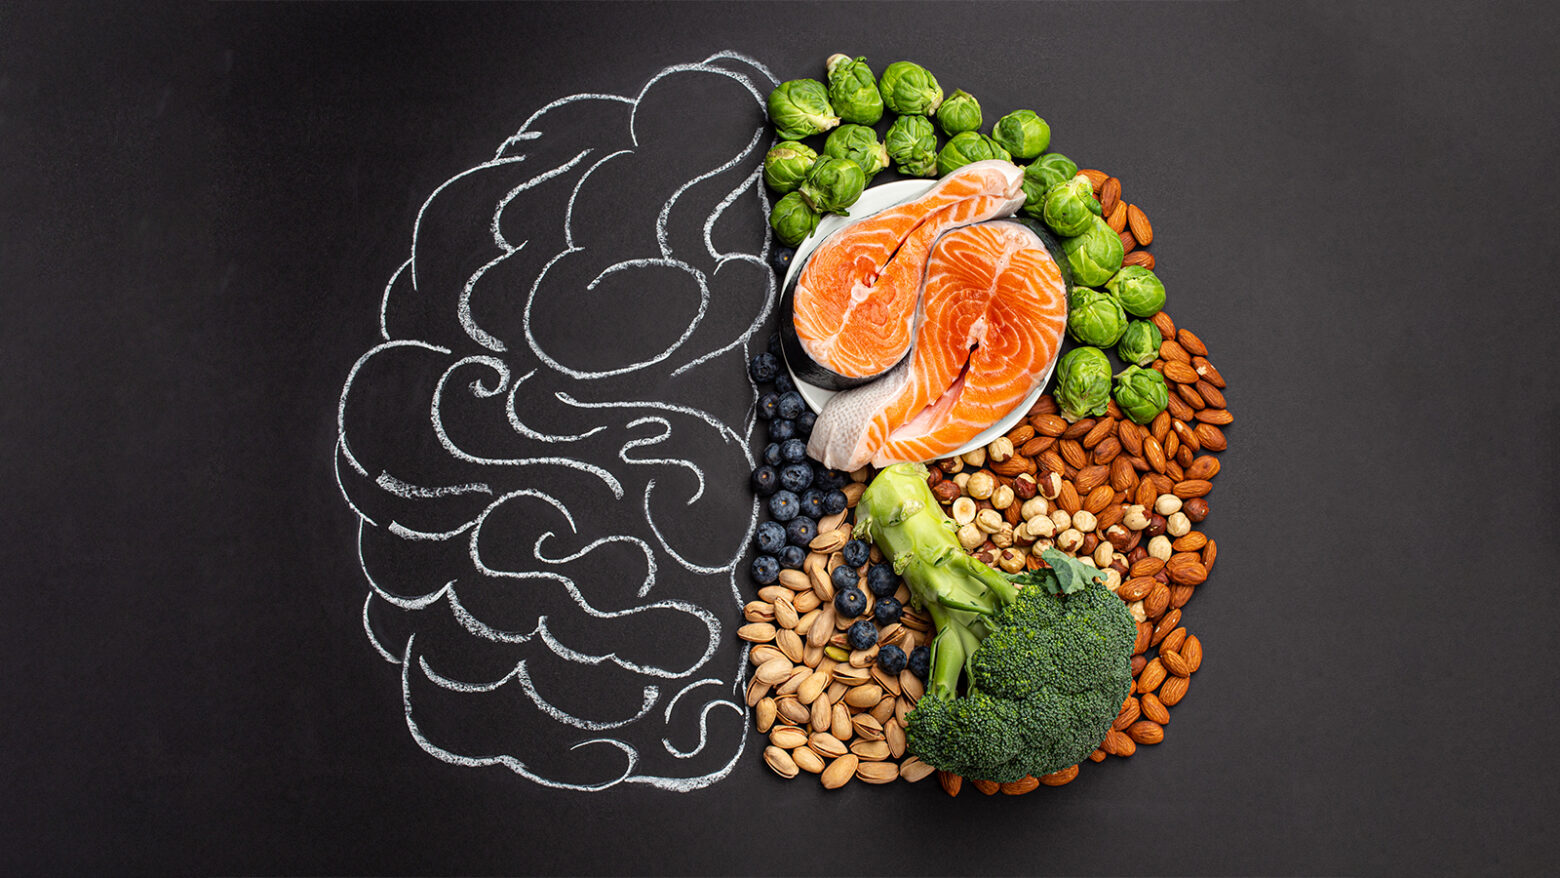 Brain concept art divided between a chalk drawing and assortment of brain-healthy foods